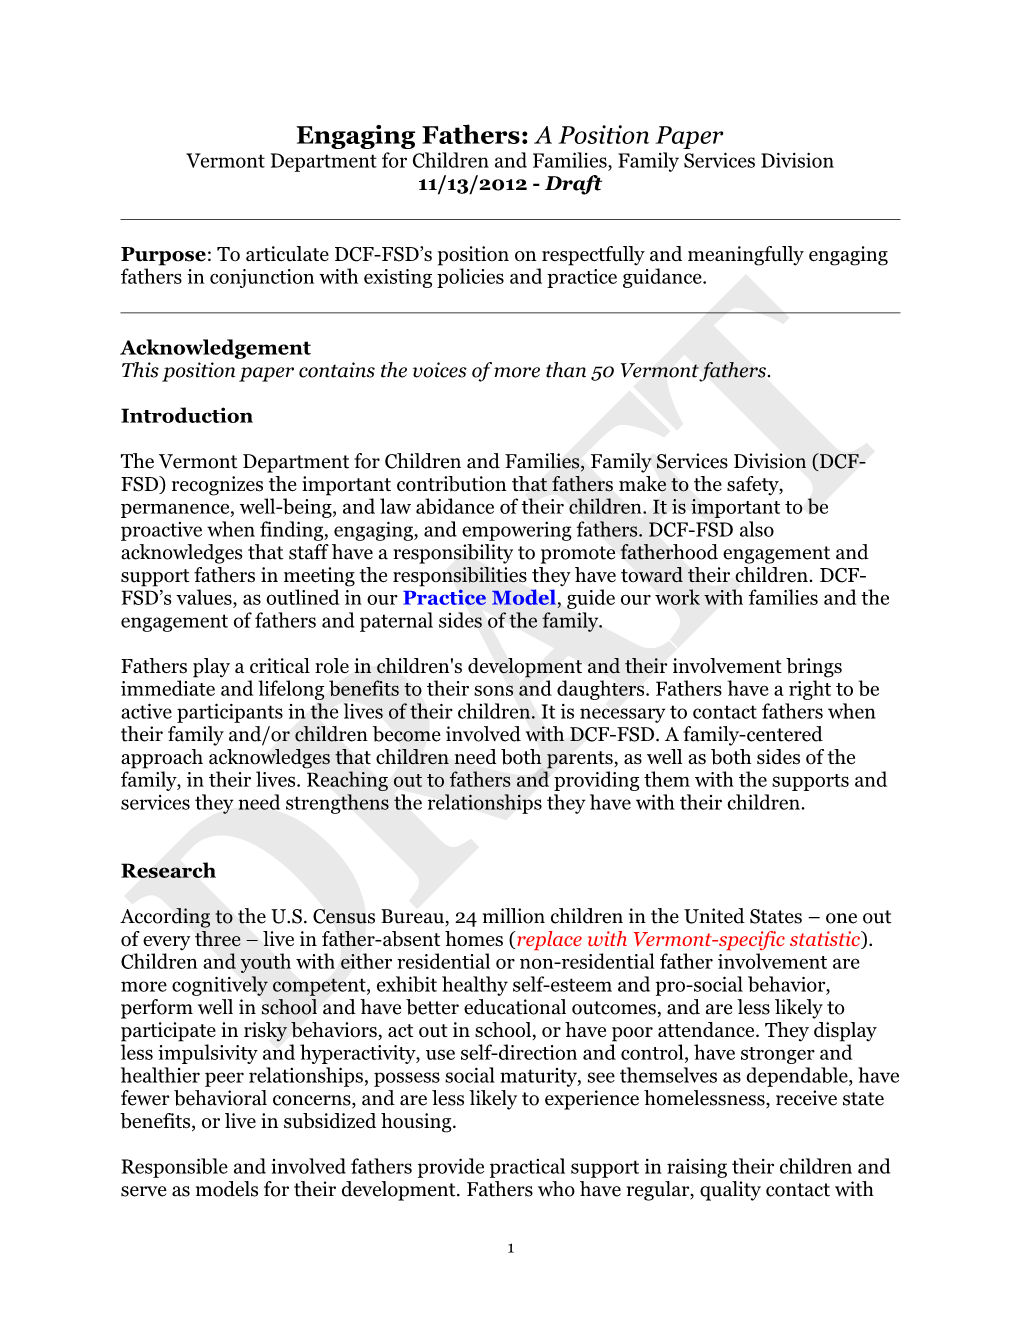 Engaging Fathers: a Position Paper